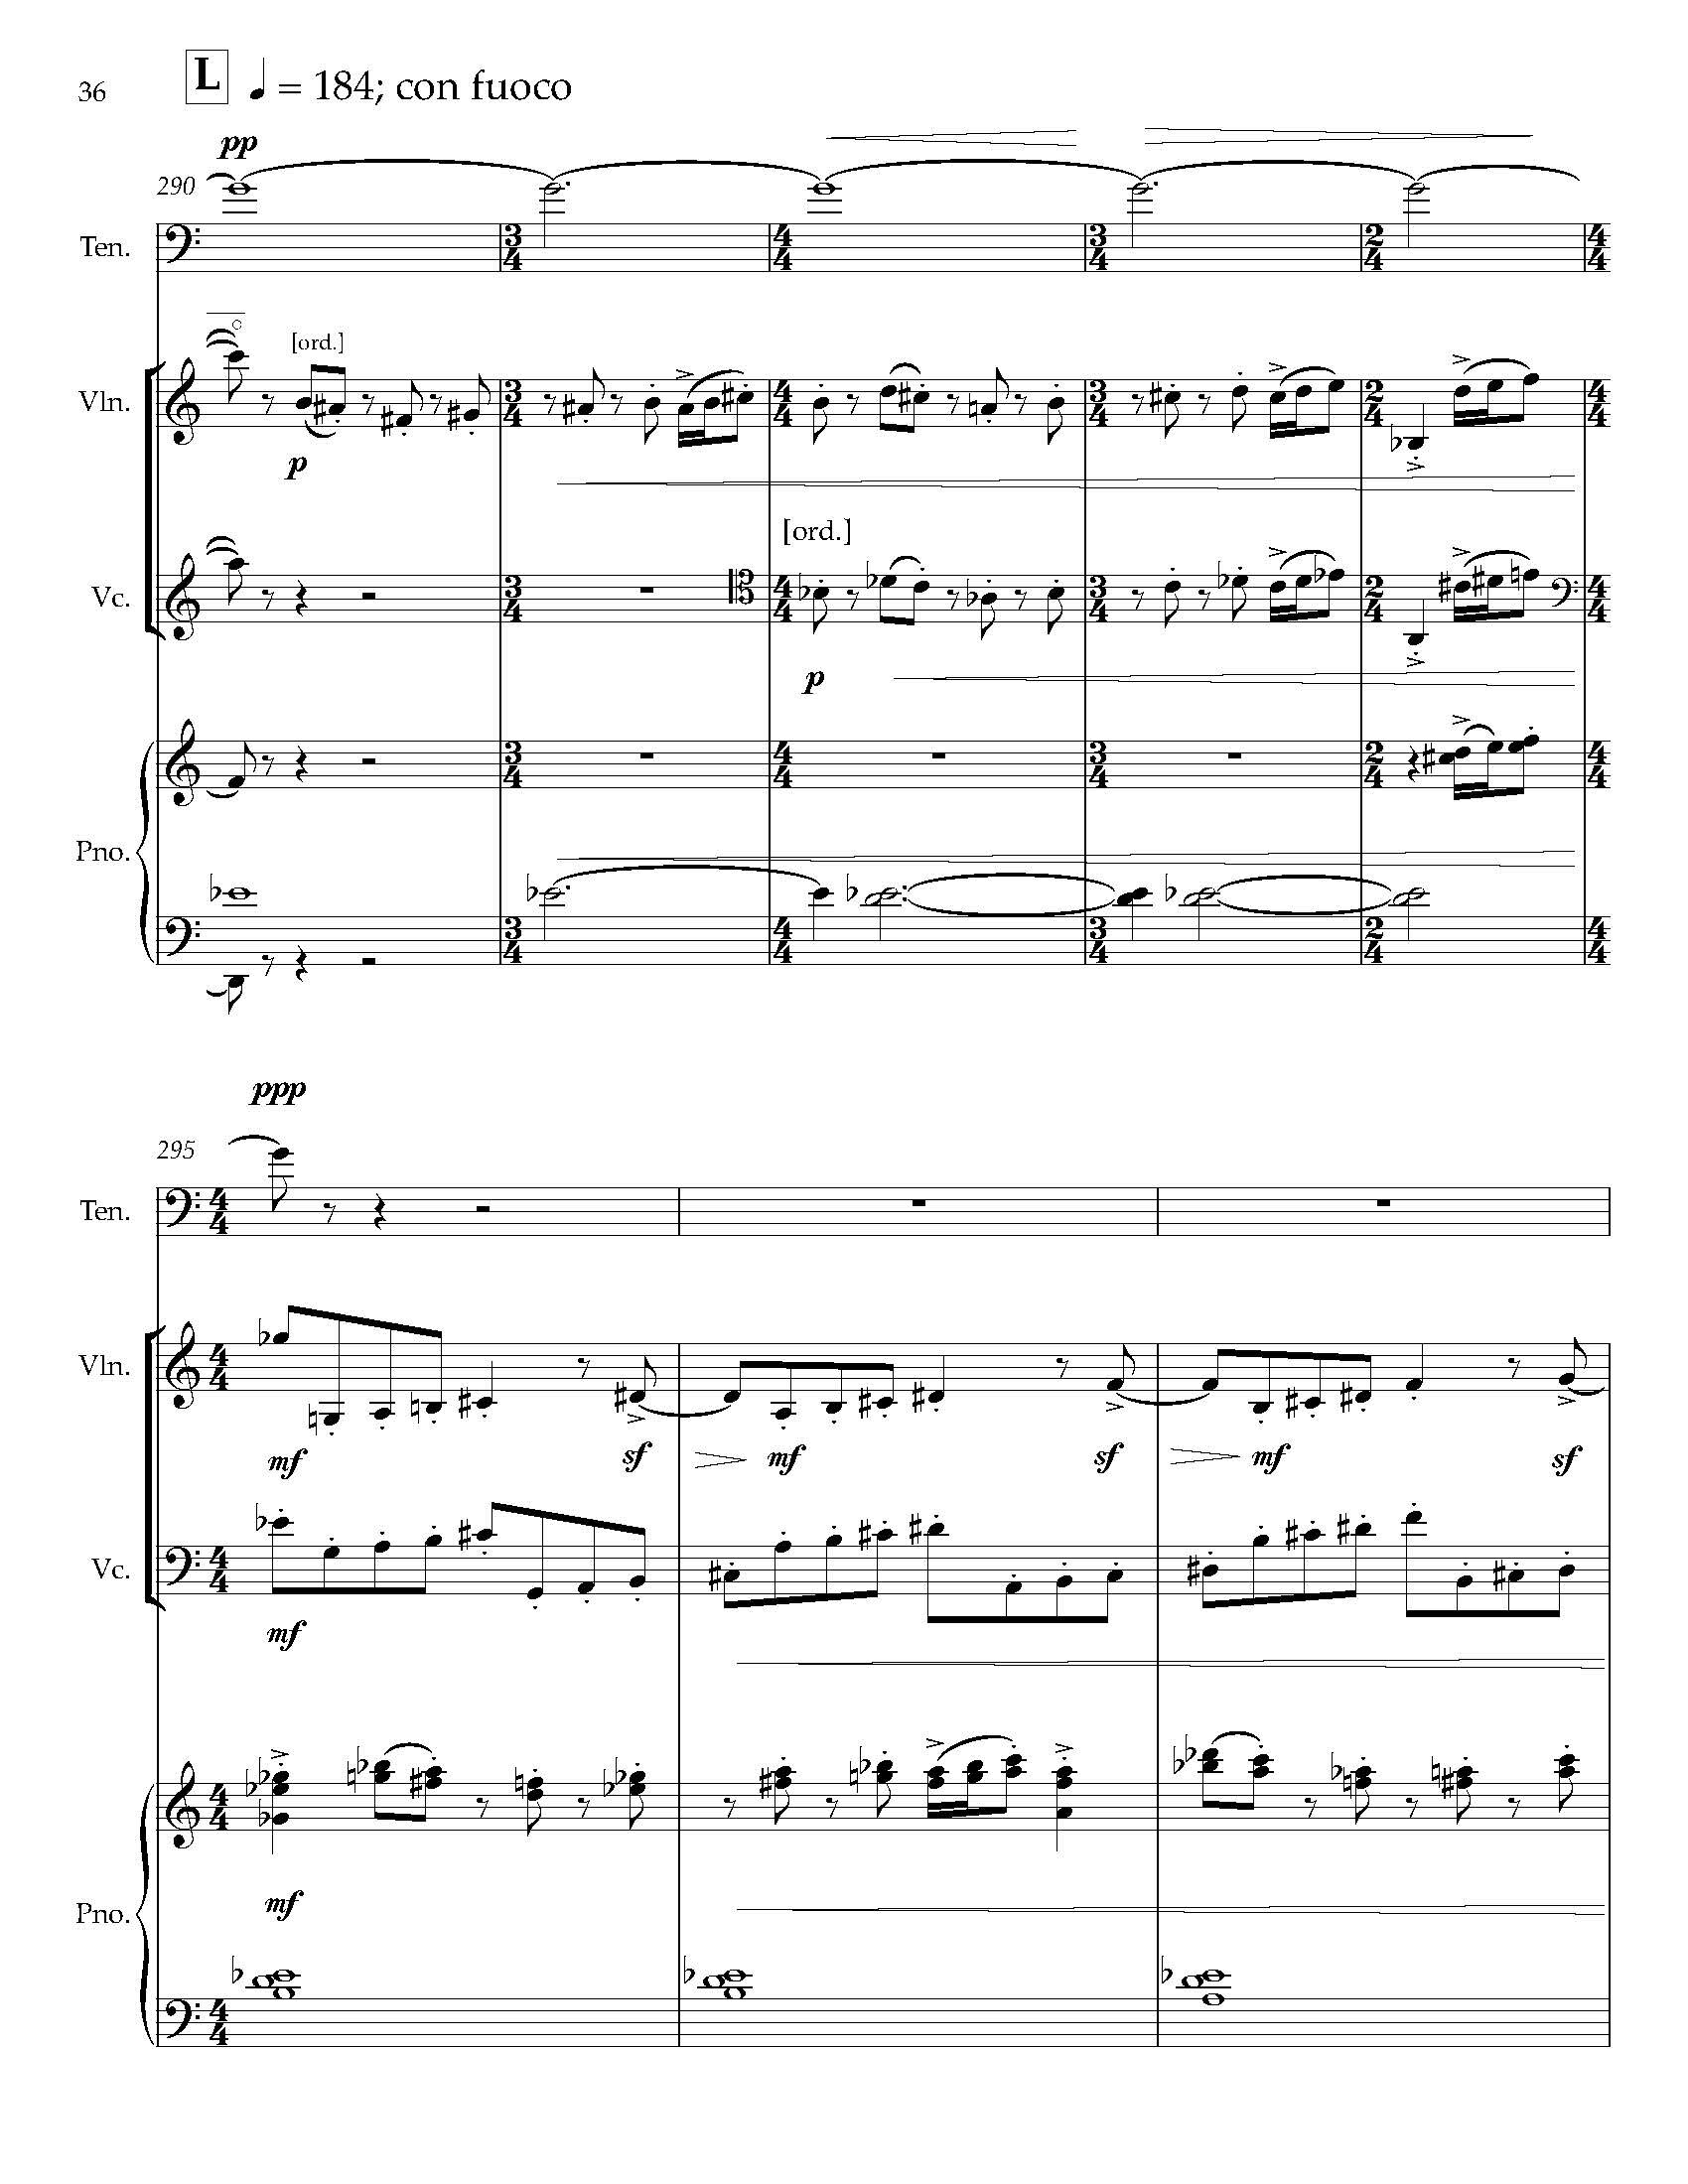 Gursky Songs - Complete Score_Page_44.jpg